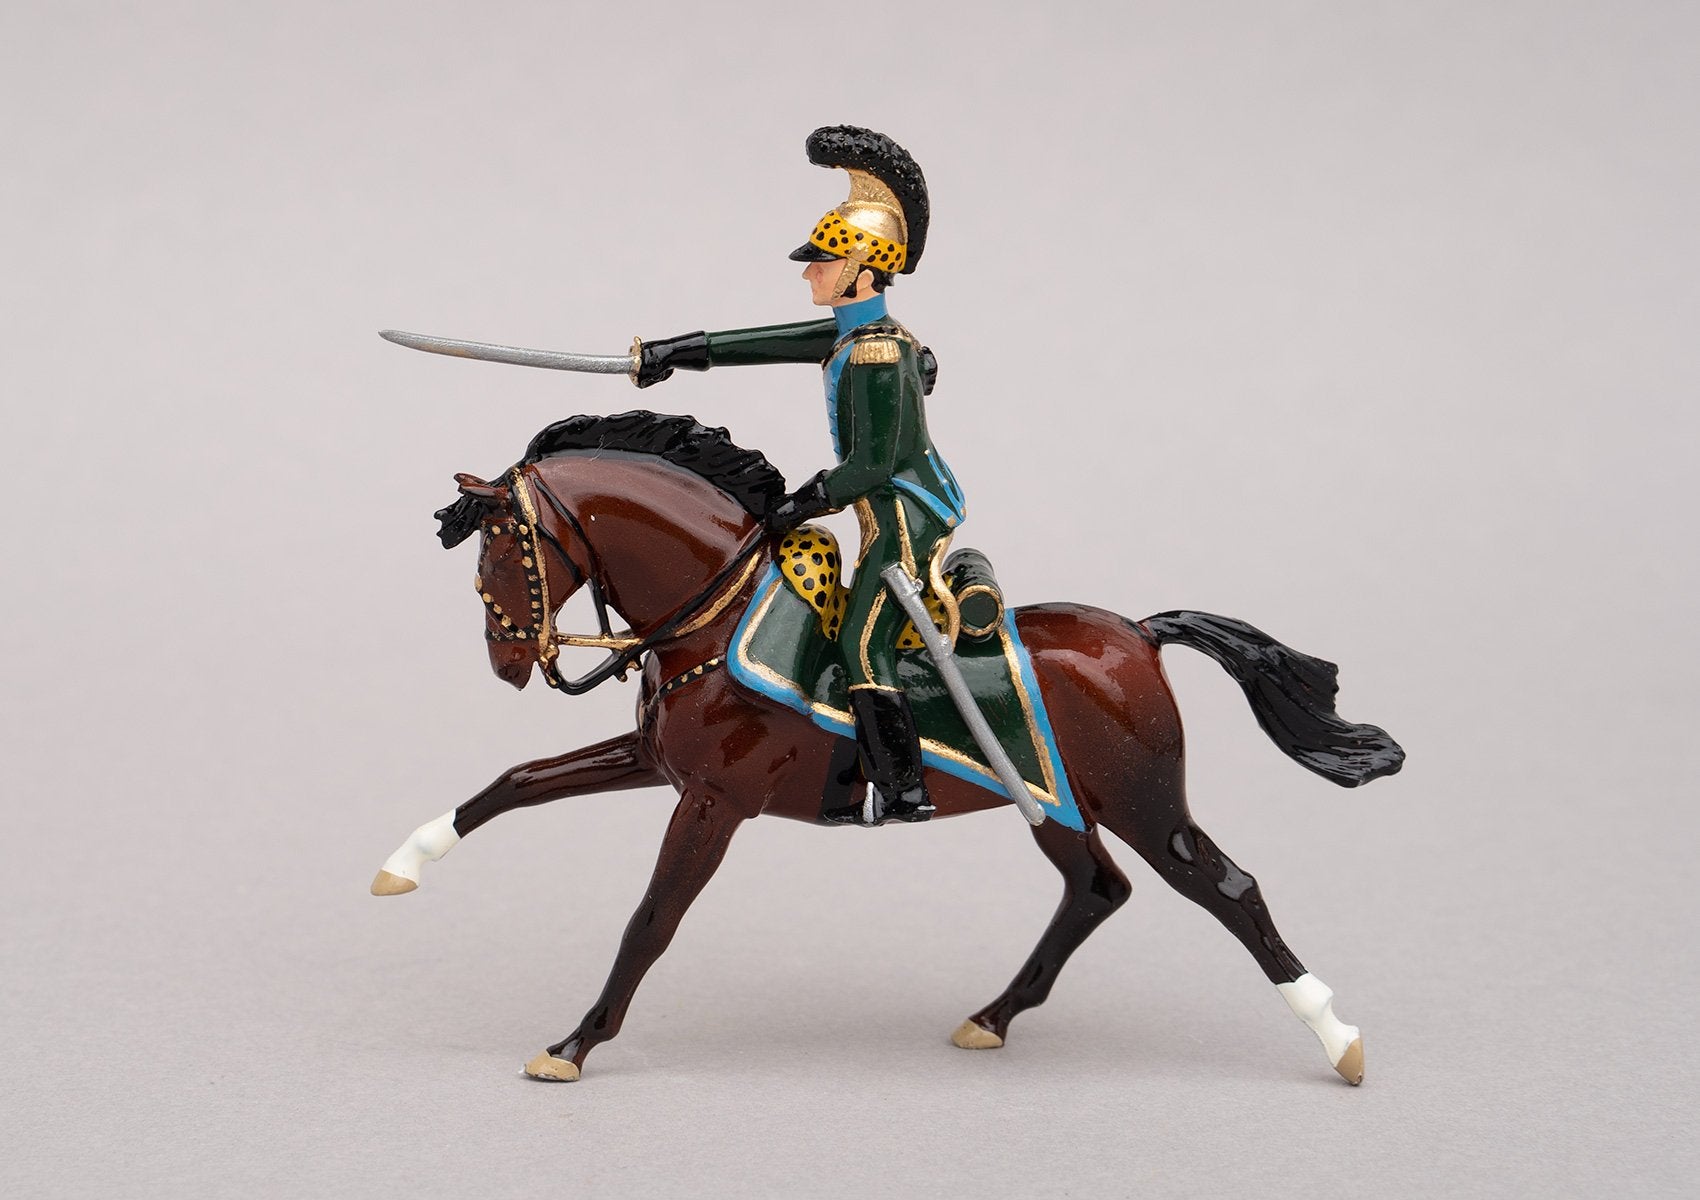 Set 134 Officer 5th Chevau-Legers Lancers | French Cavalry | Napoleonic Wars | Single mounted officer on bay horse | Waterloo | © Imperial Productions | Sculpt by David Cowe